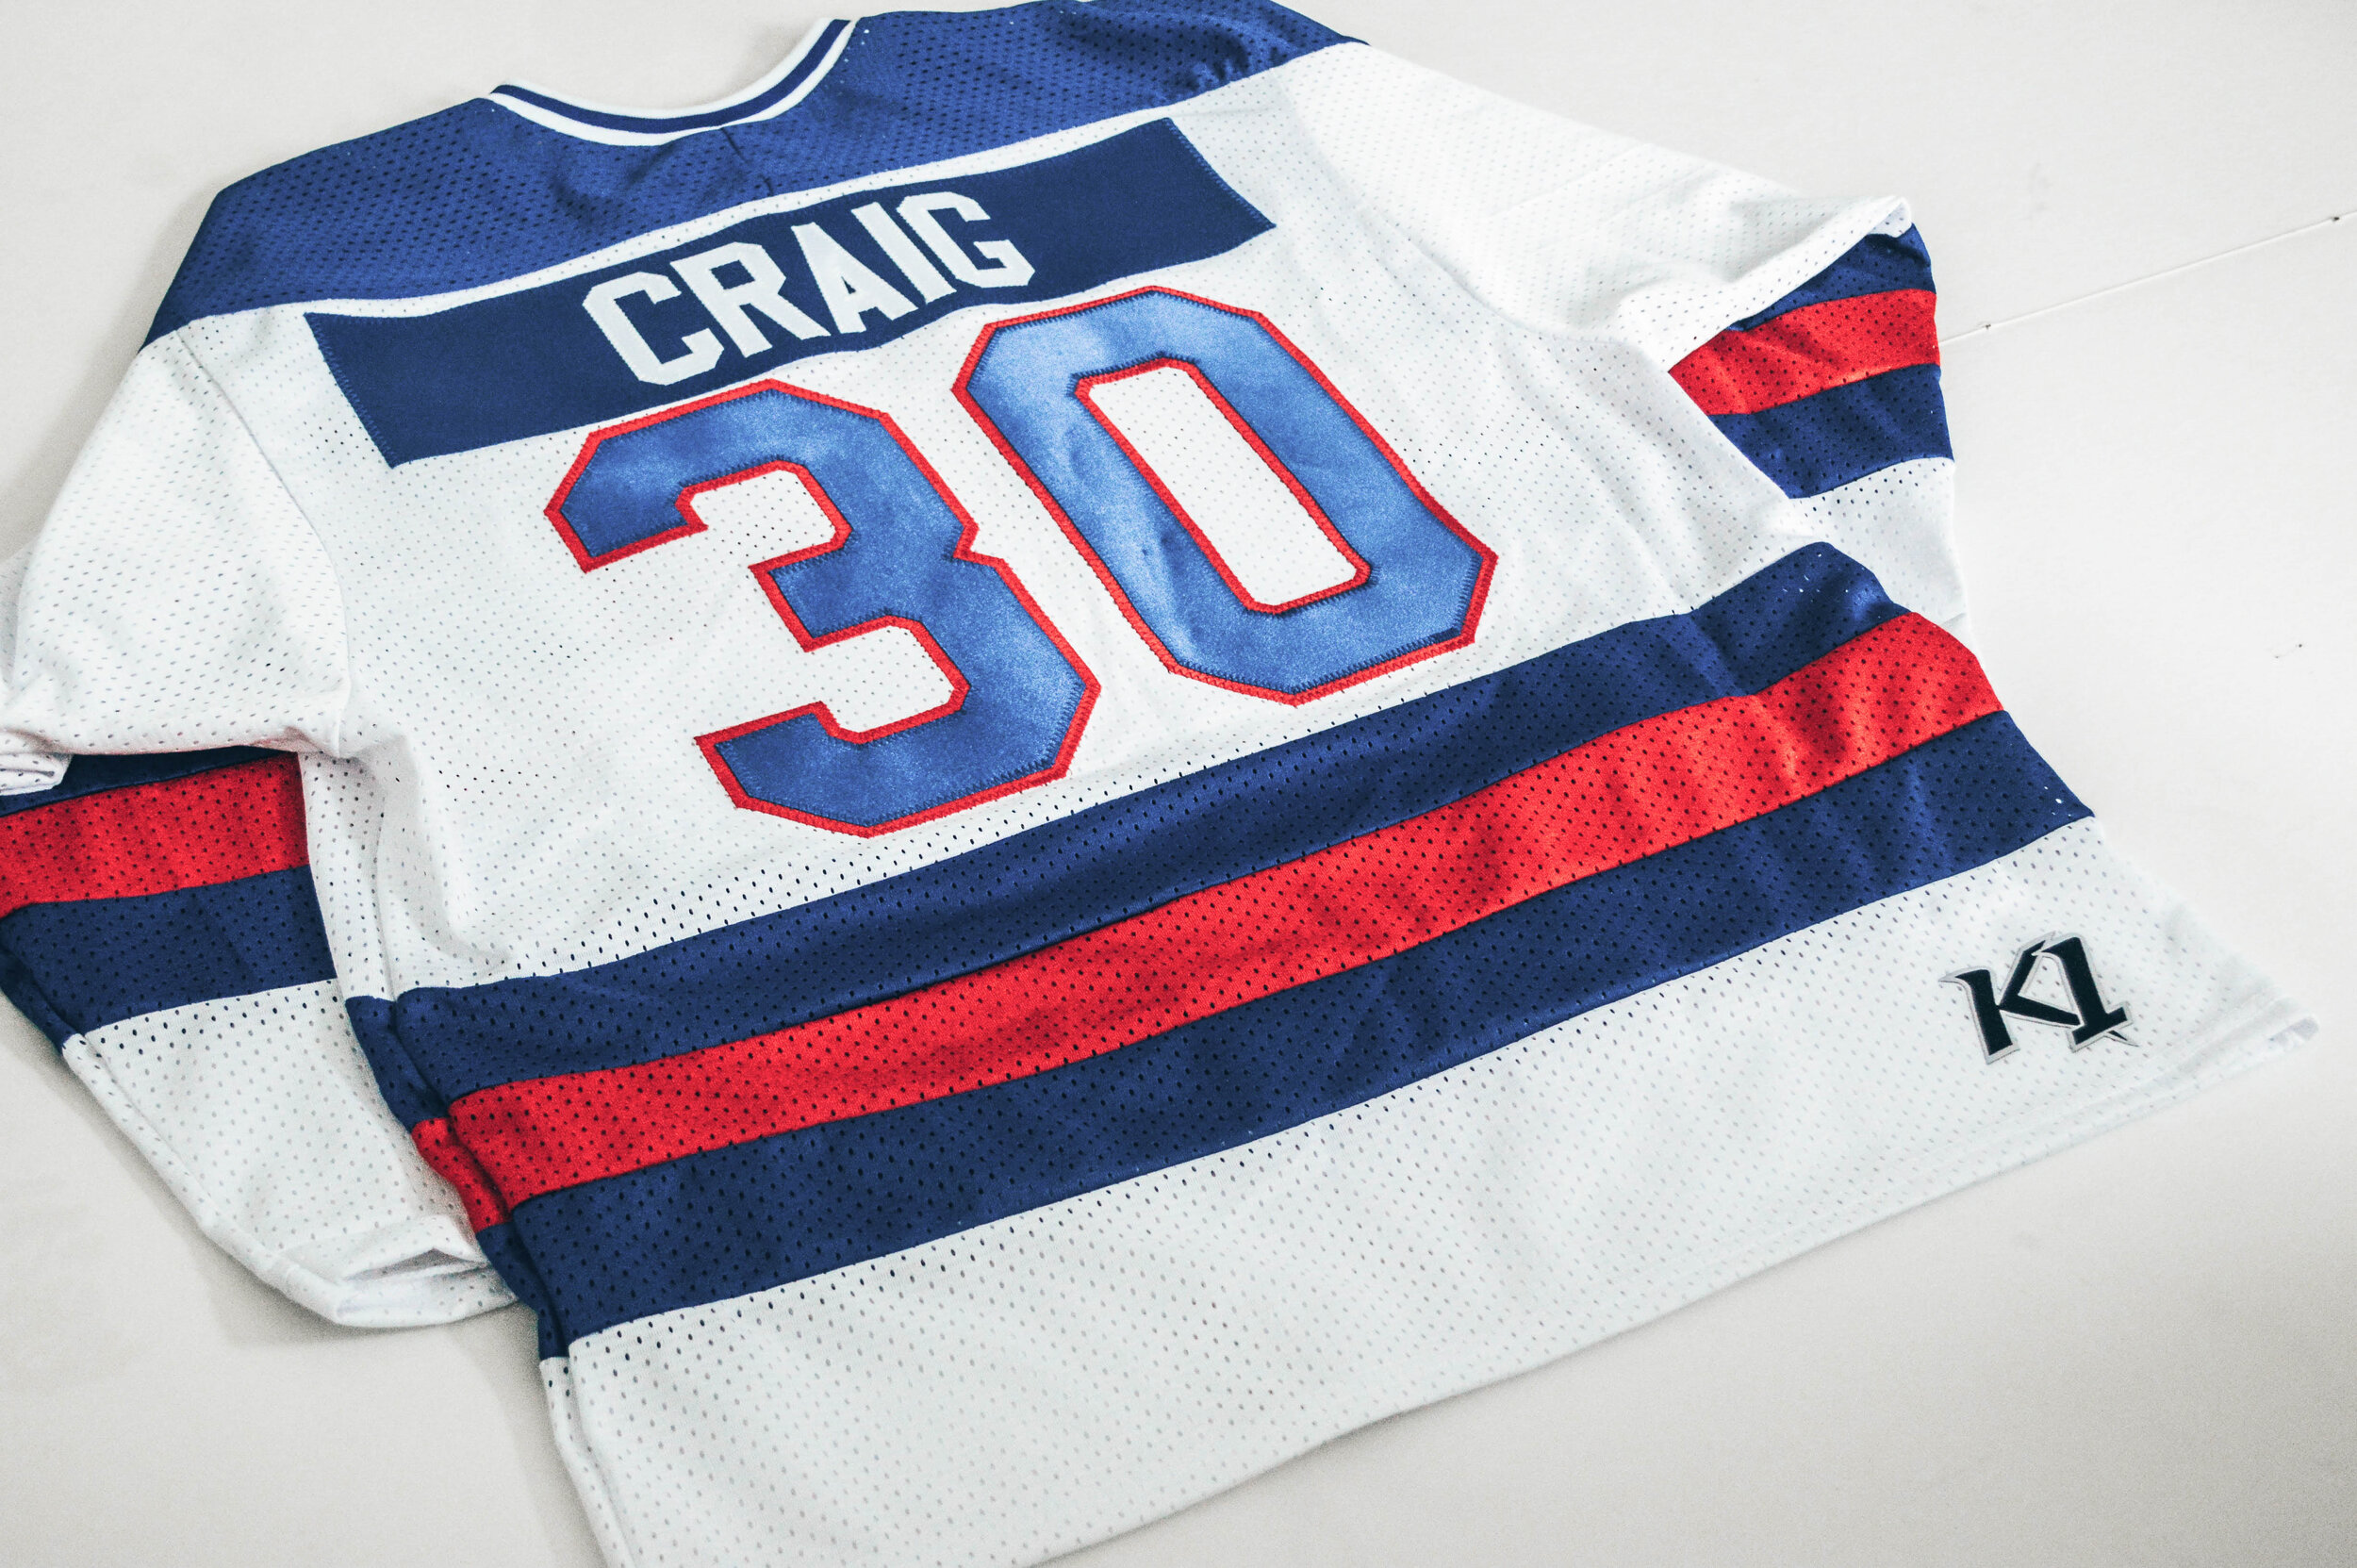 Authentic Jim Craig USA 1980 Jersey (Large) - Autographed Jim Craig, 1980  Gold — Gold Medal Strategies